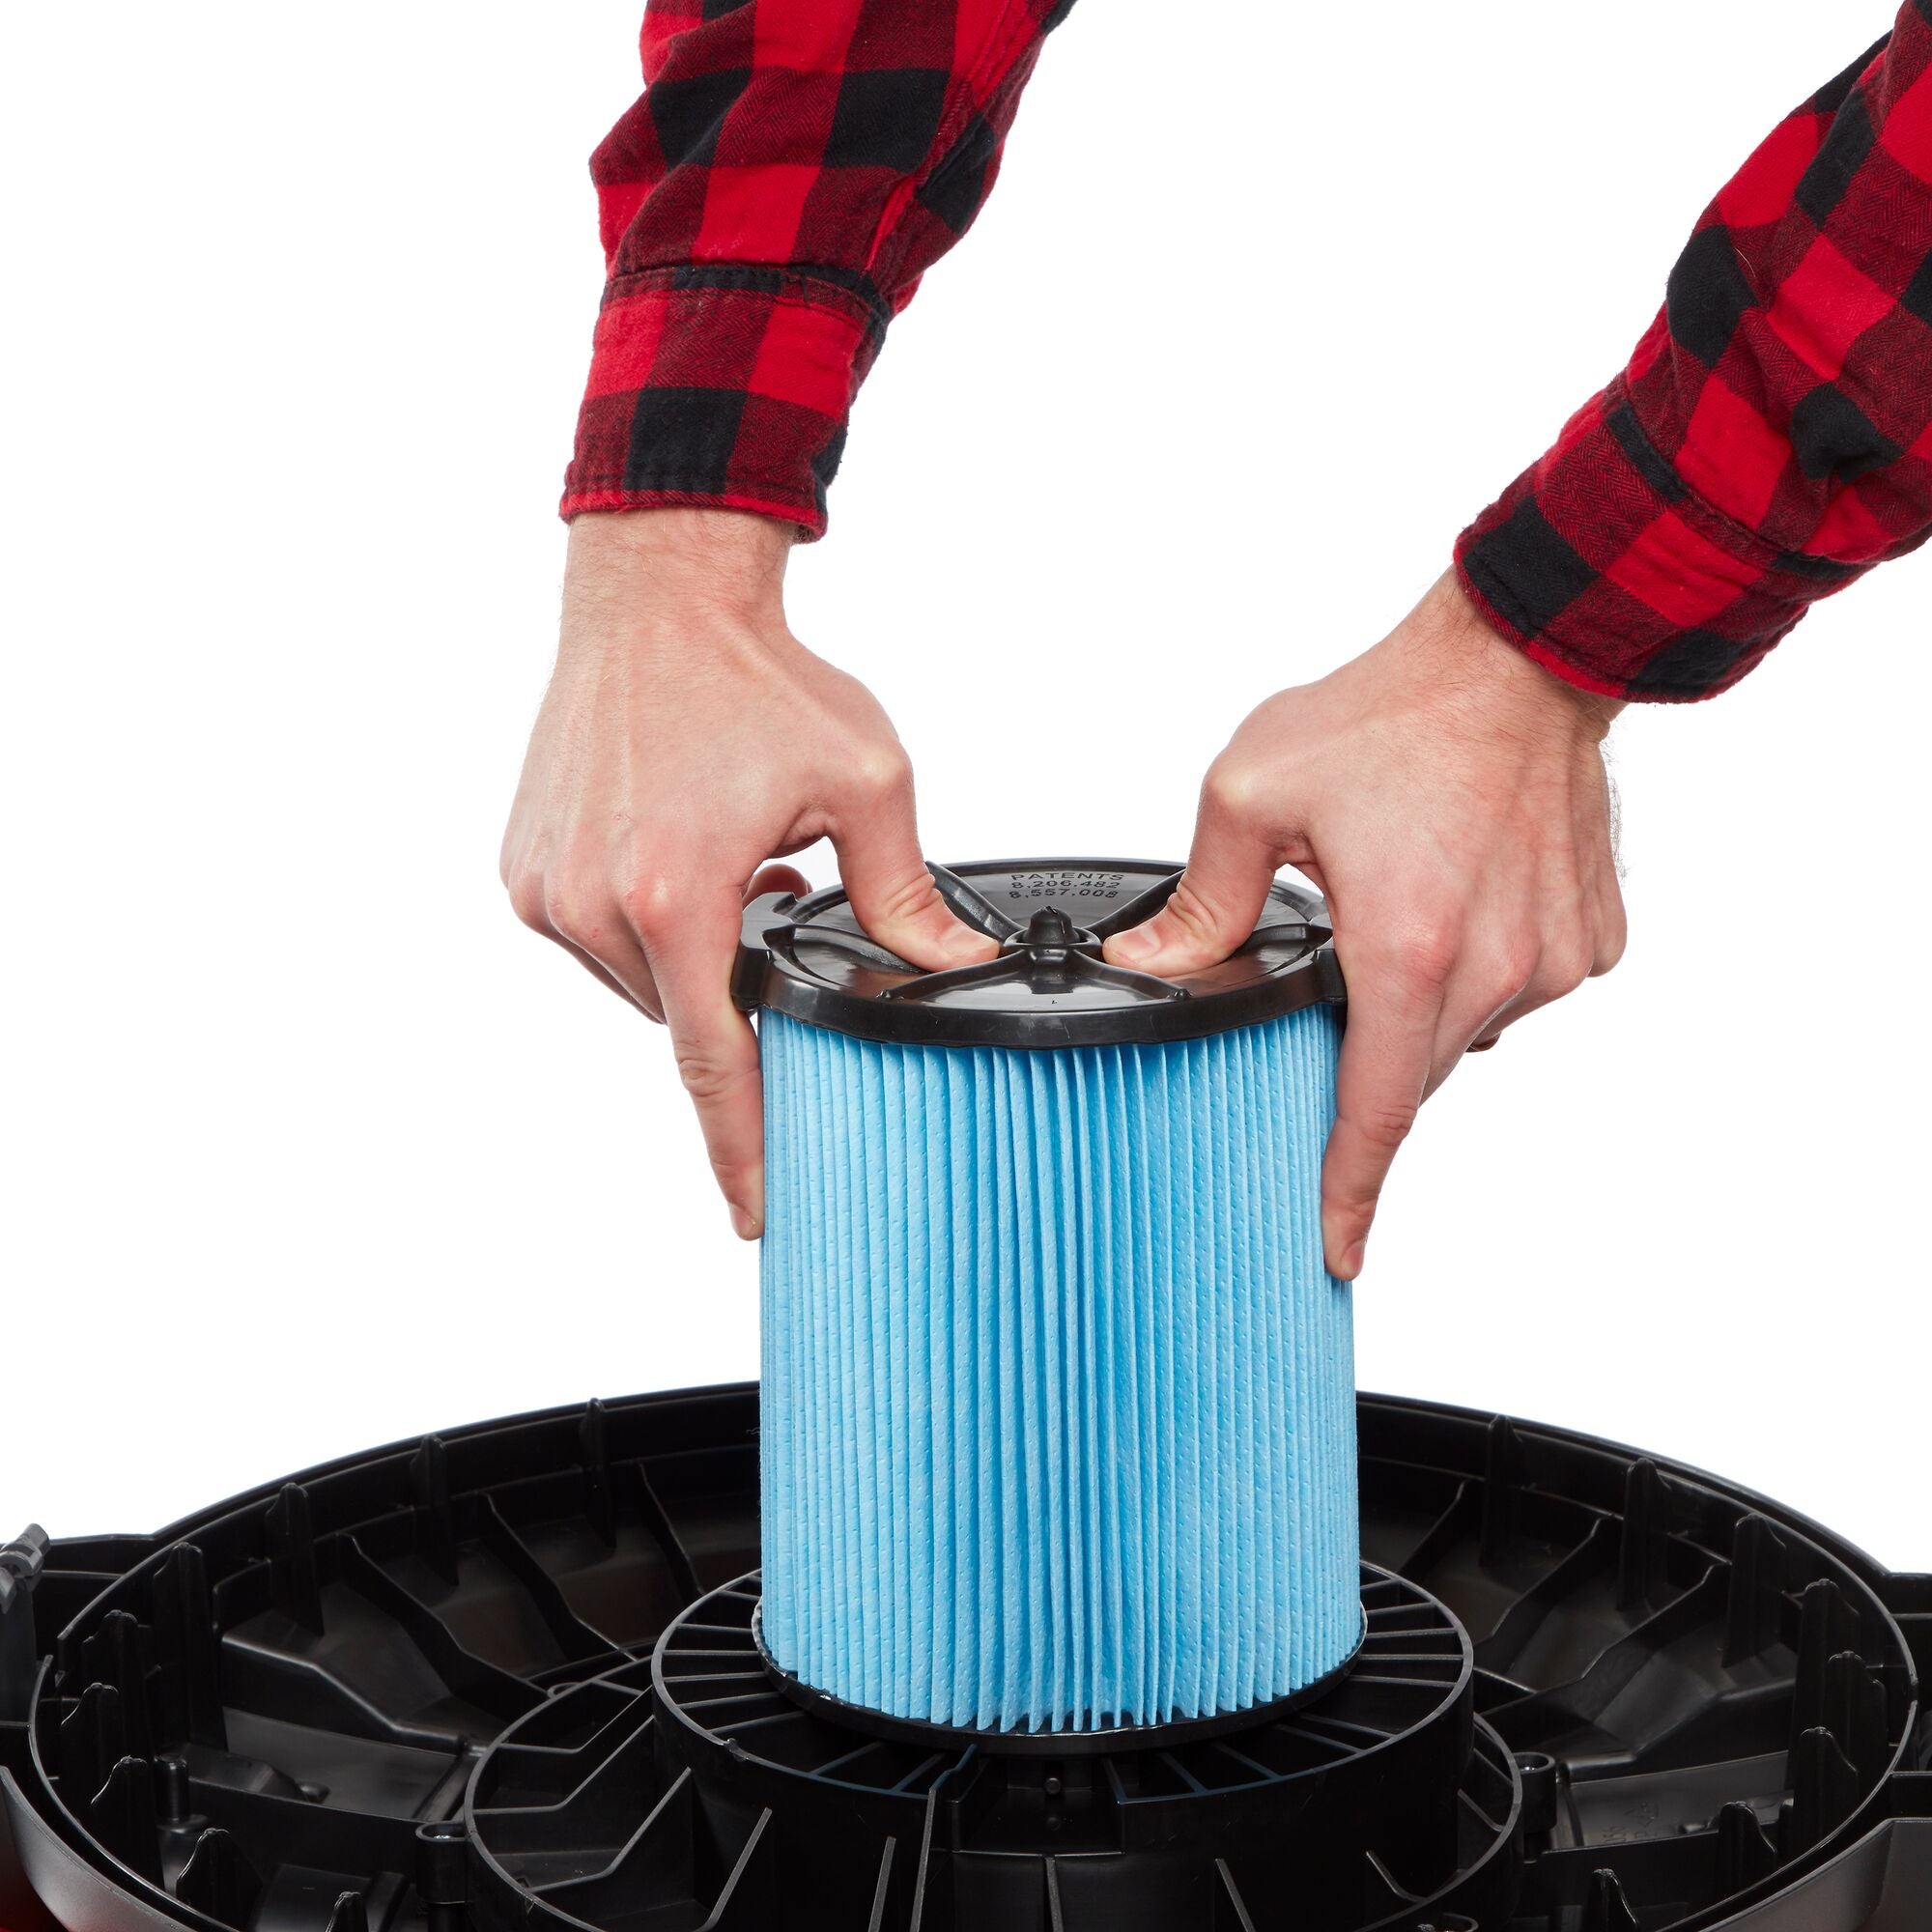 Person installing CRAFTSMAN Fine Dust Replacement Filter onto wet/dry shop vac powerhead